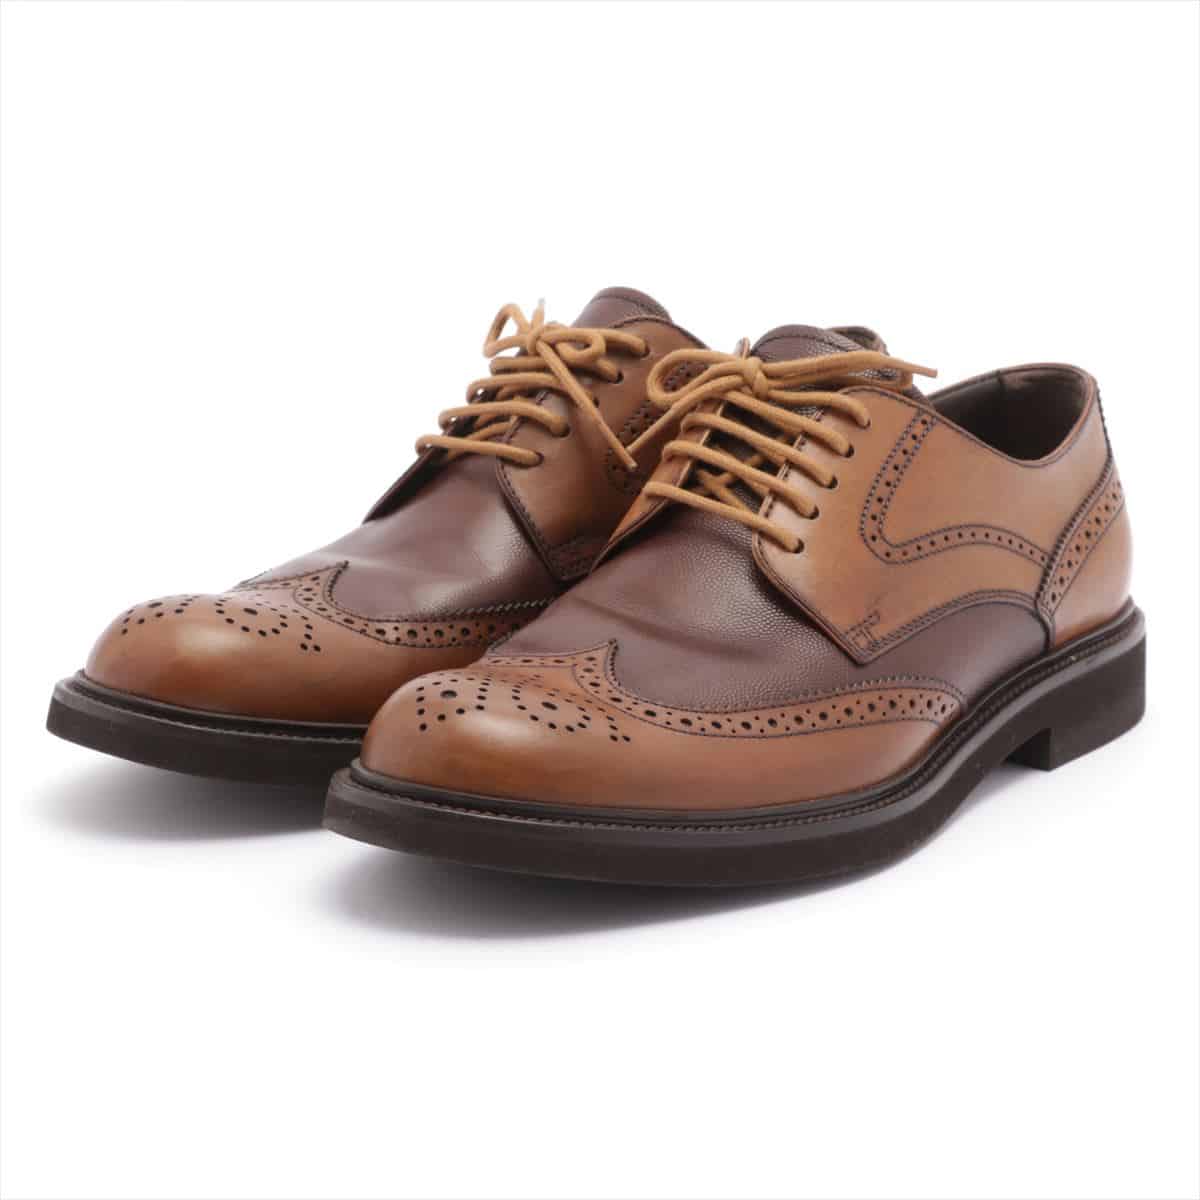 Tod's Leather Leather shoes 8 1/2 Men's Brown wingtip